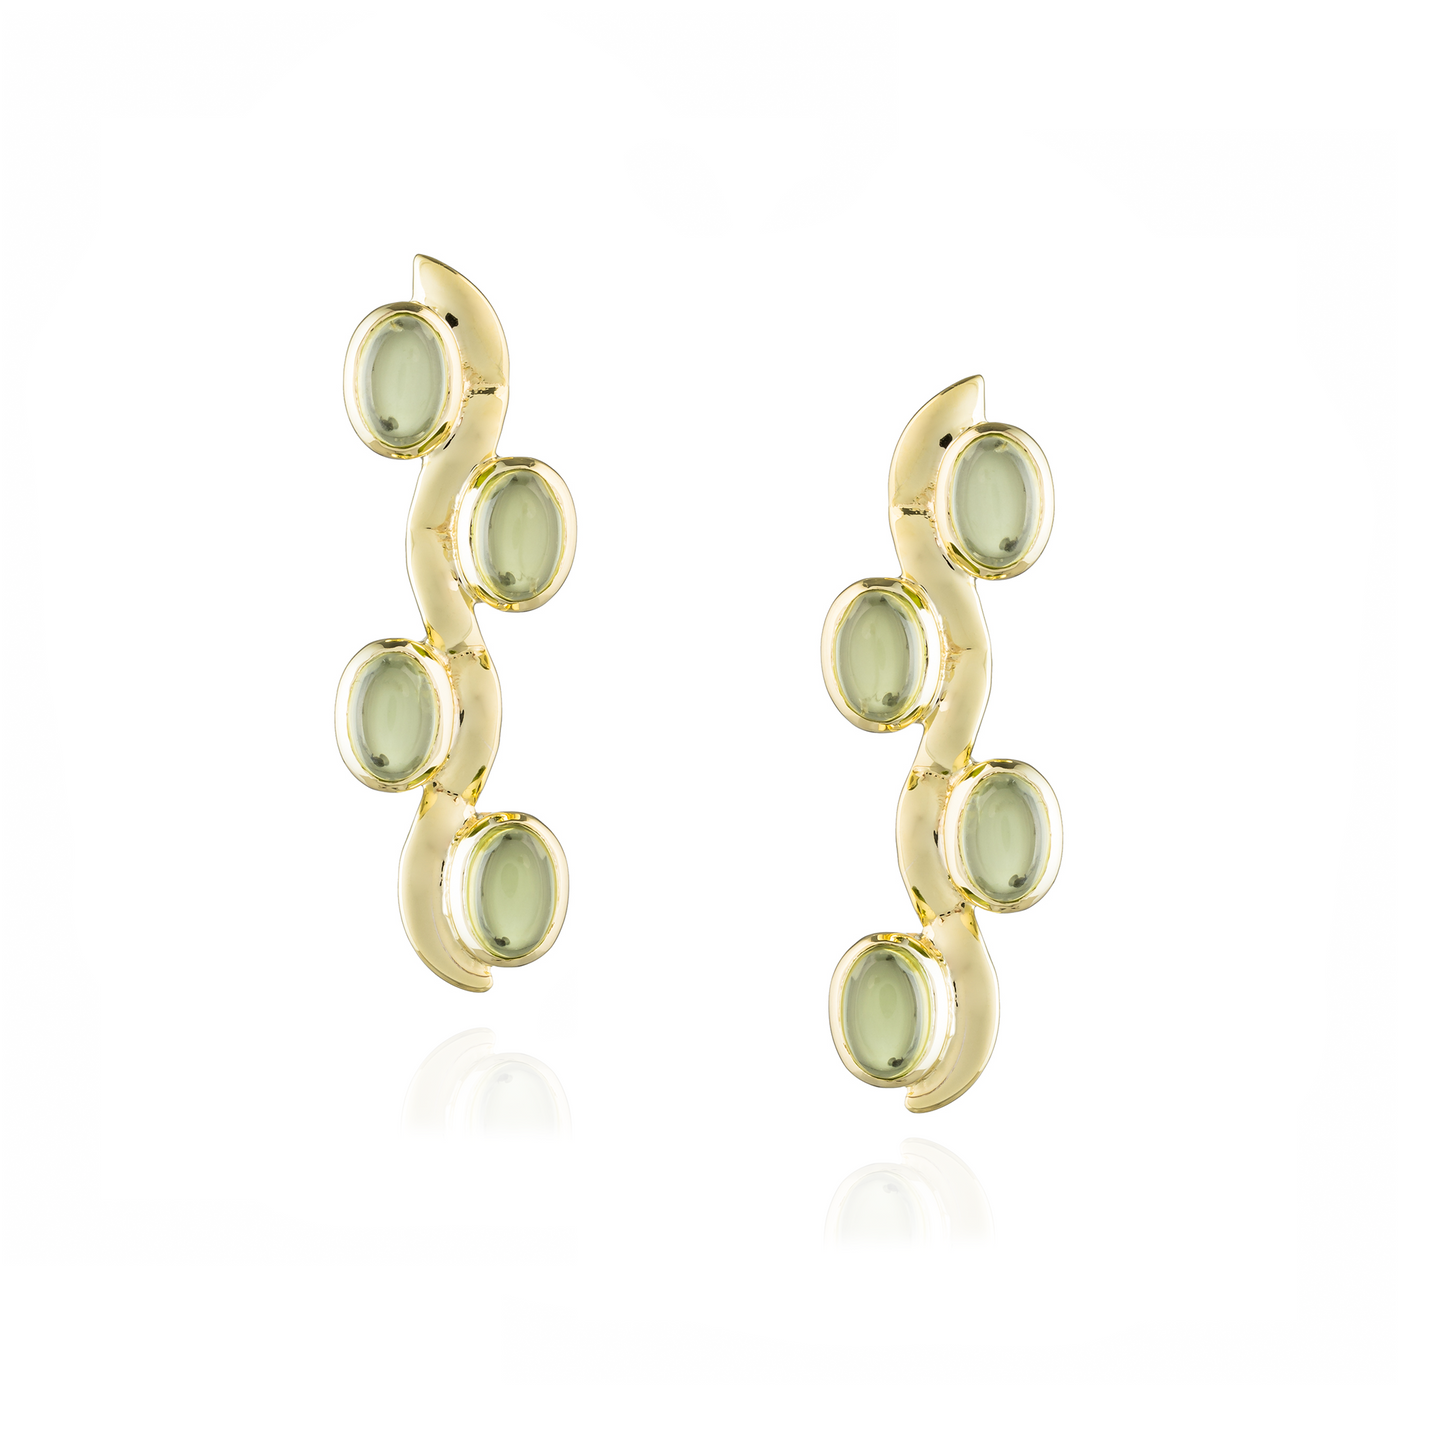 925 Silver Earrings plated in 18k Yellow Gold with Peridot Cabouchon.